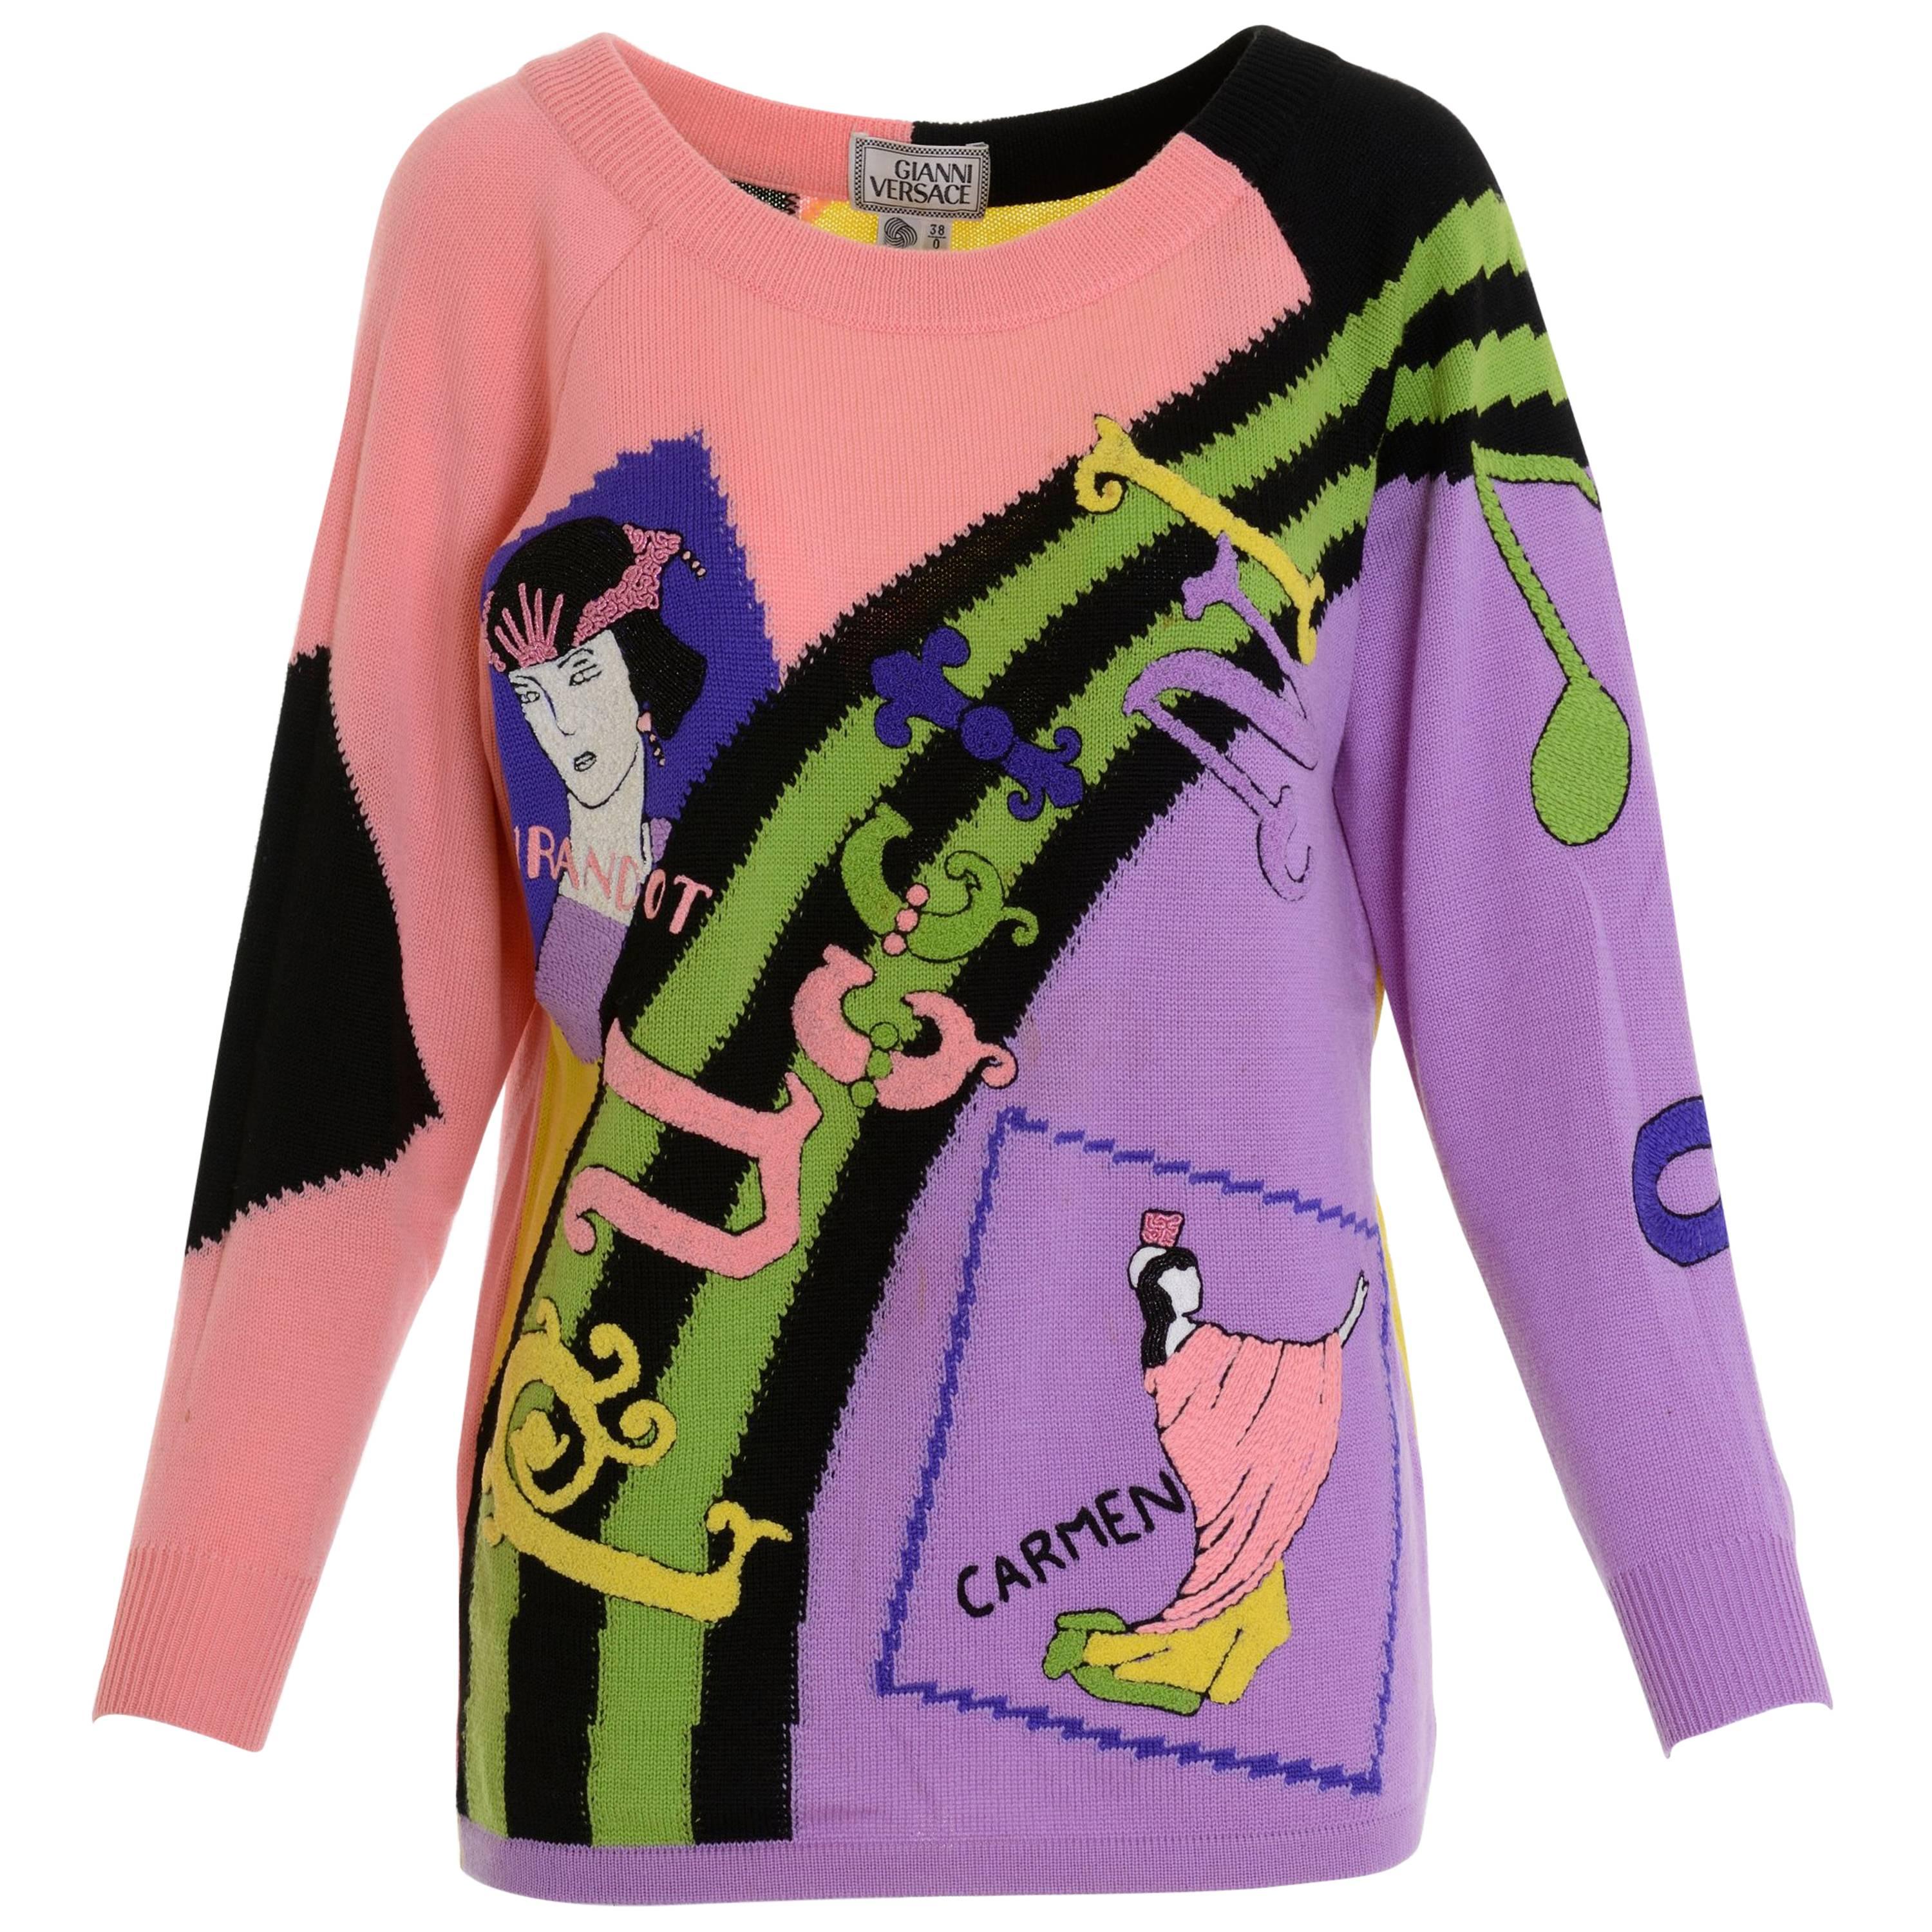 1980s GIANNI VERSACE "Opera" Printed Embroidered Sweater Pullover